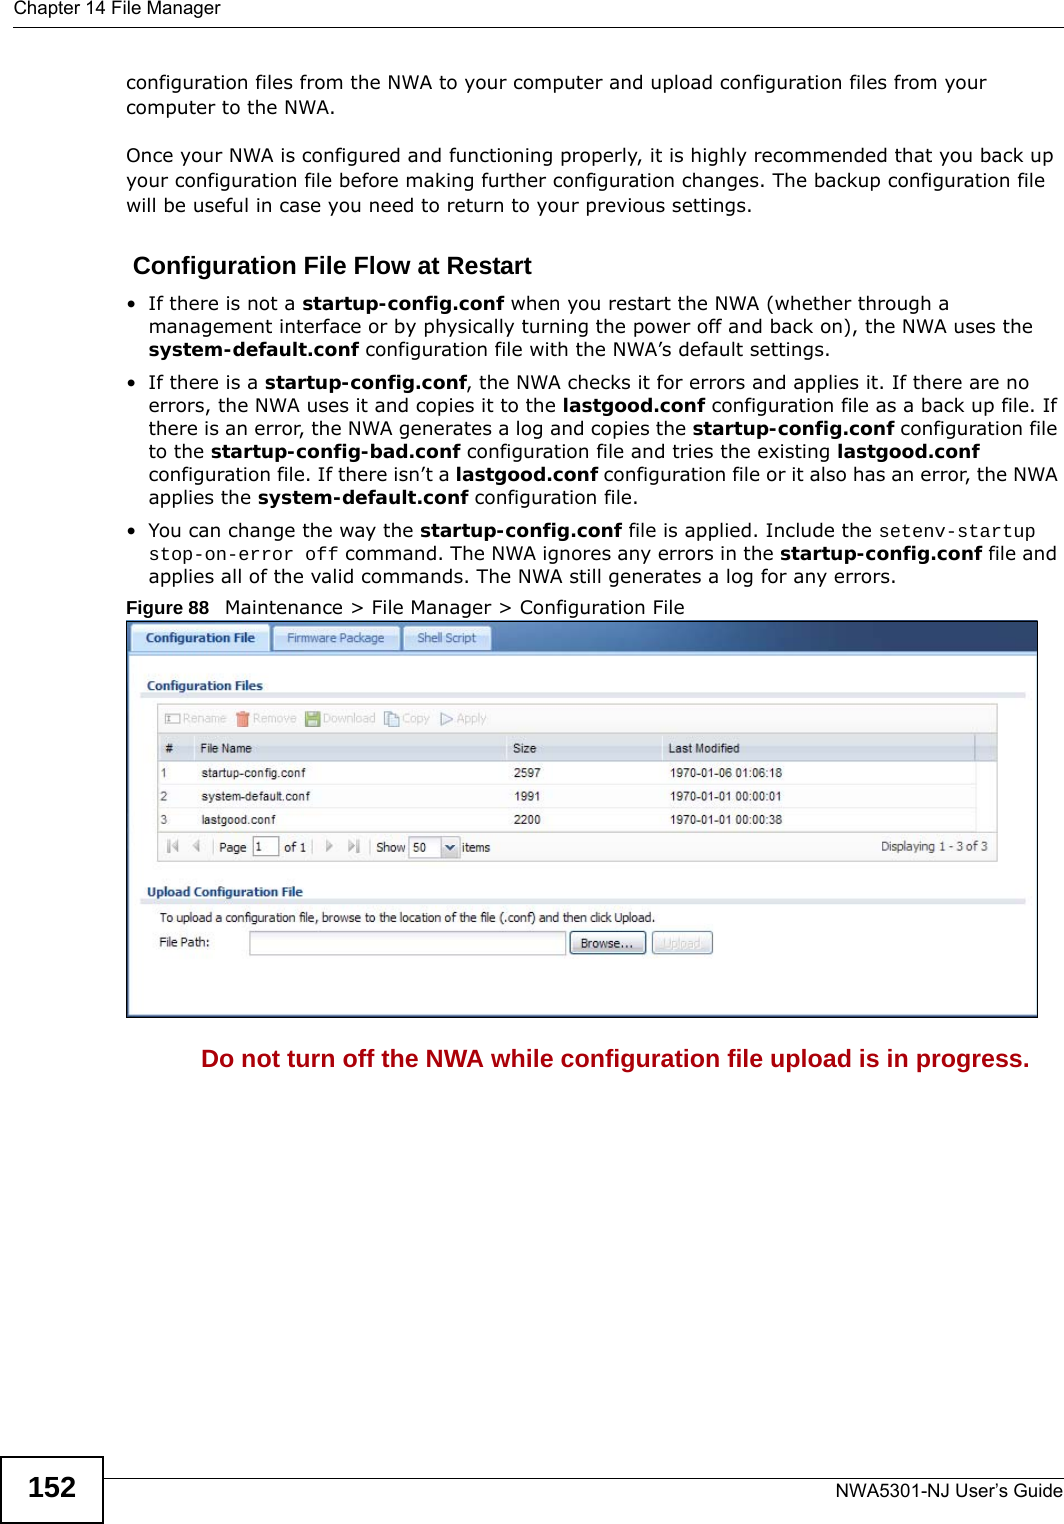 Chapter 14 File ManagerNWA5301-NJ User’s Guide152configuration files from the NWA to your computer and upload configuration files from your computer to the NWA.Once your NWA is configured and functioning properly, it is highly recommended that you back up your configuration file before making further configuration changes. The backup configuration file will be useful in case you need to return to your previous settings. Configuration File Flow at Restart• If there is not a startup-config.conf when you restart the NWA (whether through a management interface or by physically turning the power off and back on), the NWA uses the system-default.conf configuration file with the NWA’s default settings.•If there is a startup-config.conf, the NWA checks it for errors and applies it. If there are no errors, the NWA uses it and copies it to the lastgood.conf configuration file as a back up file. If there is an error, the NWA generates a log and copies the startup-config.conf configuration file to the startup-config-bad.conf configuration file and tries the existing lastgood.conf configuration file. If there isn’t a lastgood.conf configuration file or it also has an error, the NWA applies the system-default.conf configuration file.• You can change the way the startup-config.conf file is applied. Include the setenv-startup stop-on-error off command. The NWA ignores any errors in the startup-config.conf file and applies all of the valid commands. The NWA still generates a log for any errors. Figure 88   Maintenance &gt; File Manager &gt; Configuration File Do not turn off the NWA while configuration file upload is in progress.